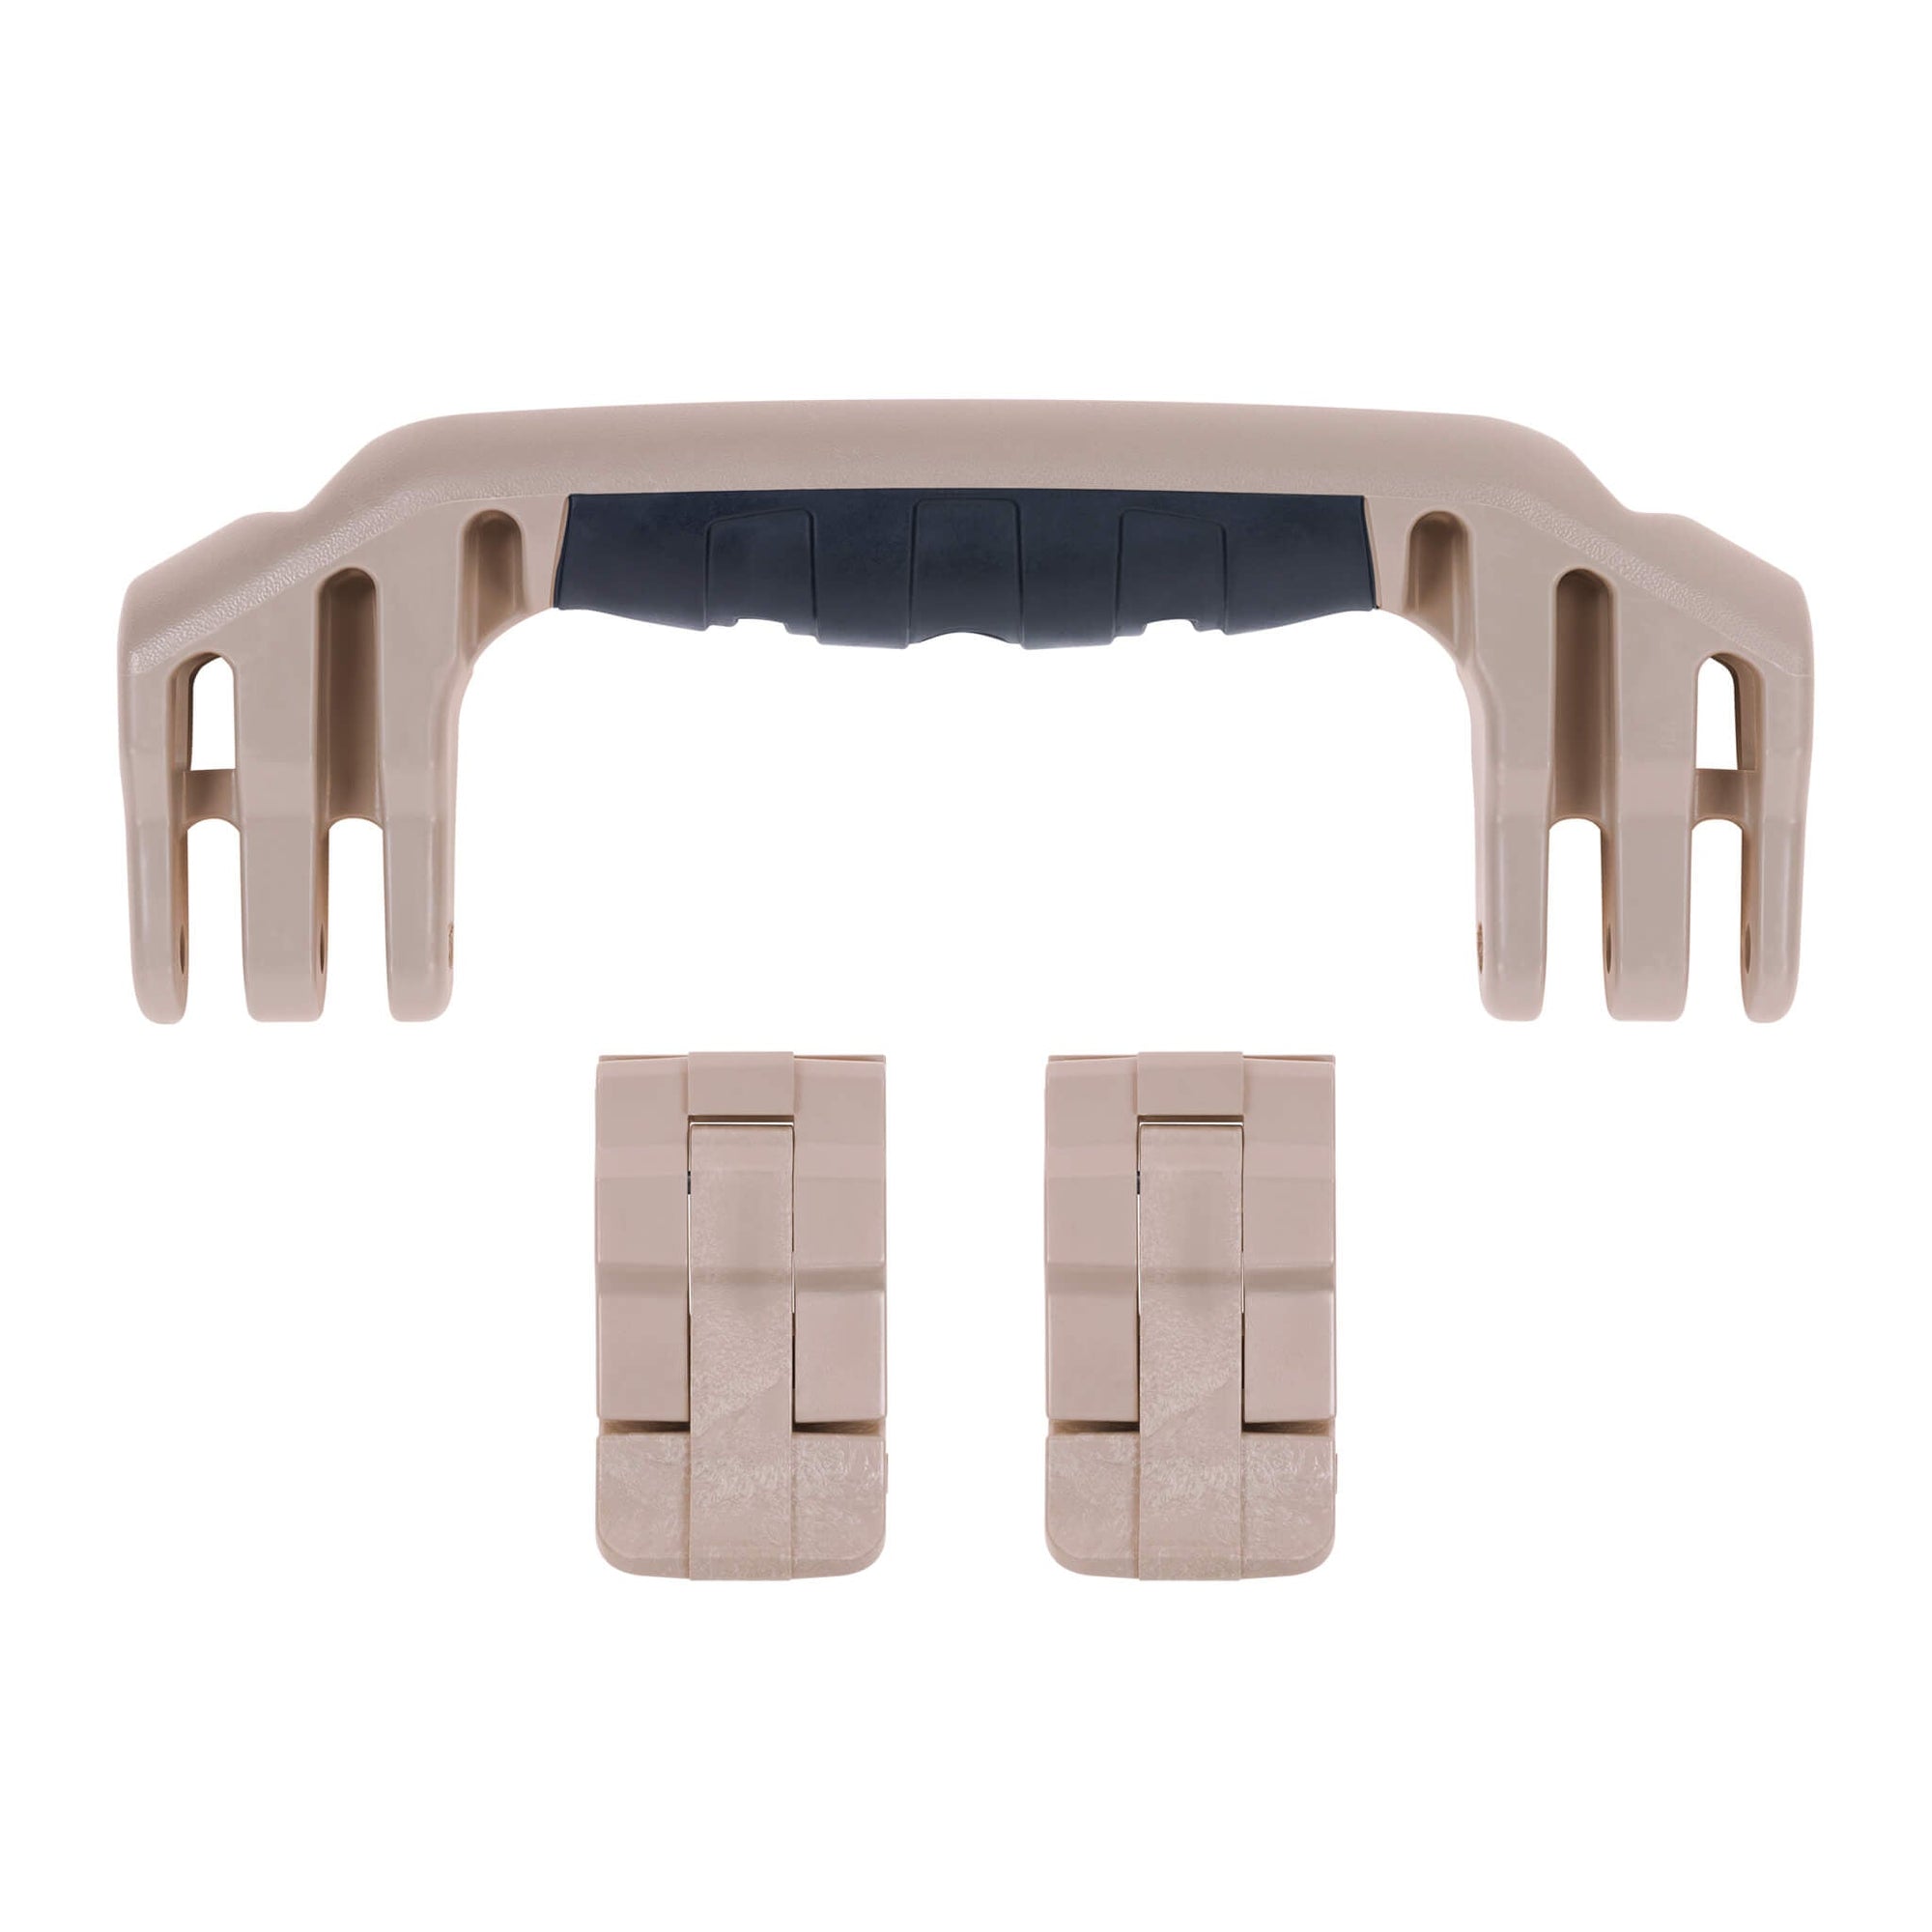 Pelican 1450 Replacement Handle & Latches, Desert Tan (Set of 1 Handle, 2 Latches) ColorCase 